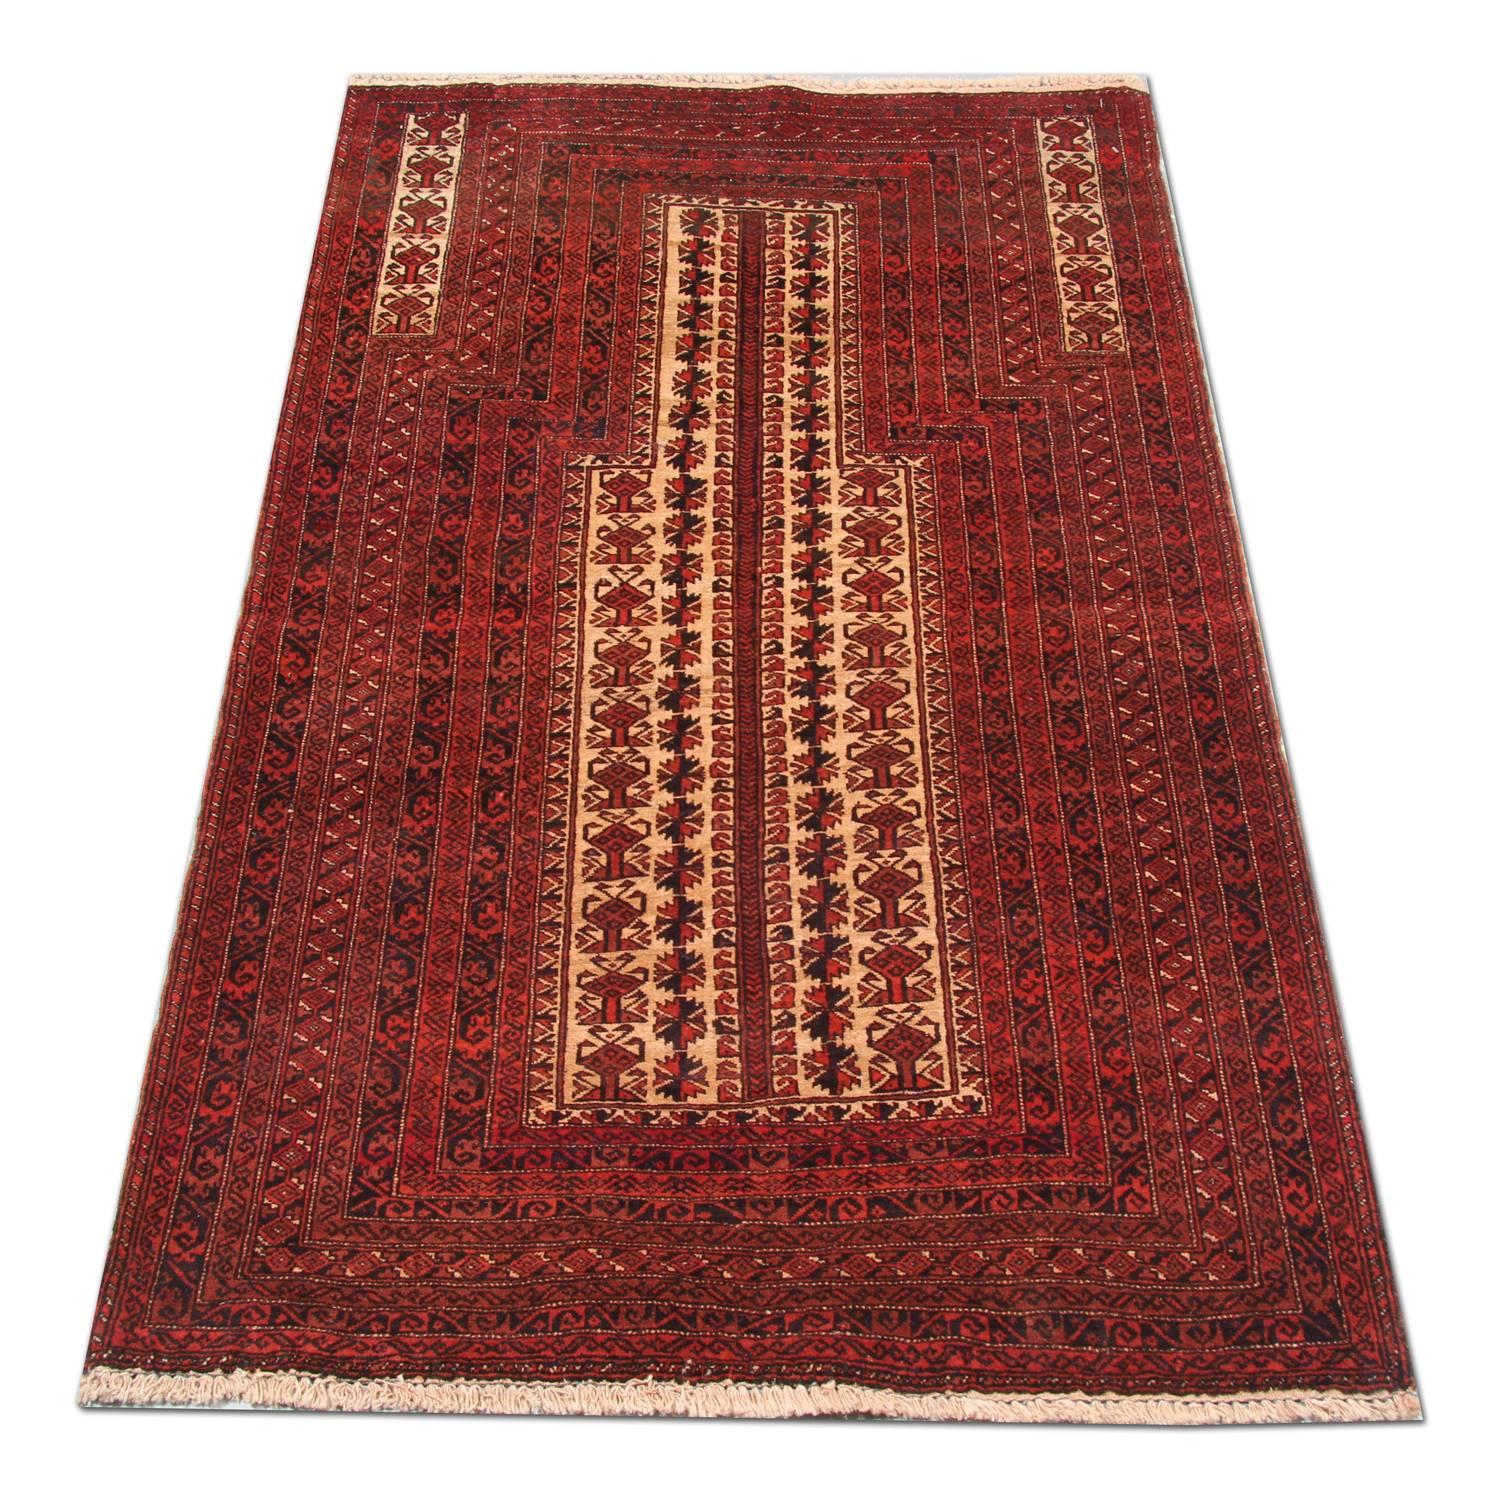 This rich red area rug was woven by hand and features a traditional prayer rug design. The central pattern reveals decorative motifs woven on a cream field in the same rich red accents as the surrounding design. This piece is sure to make the